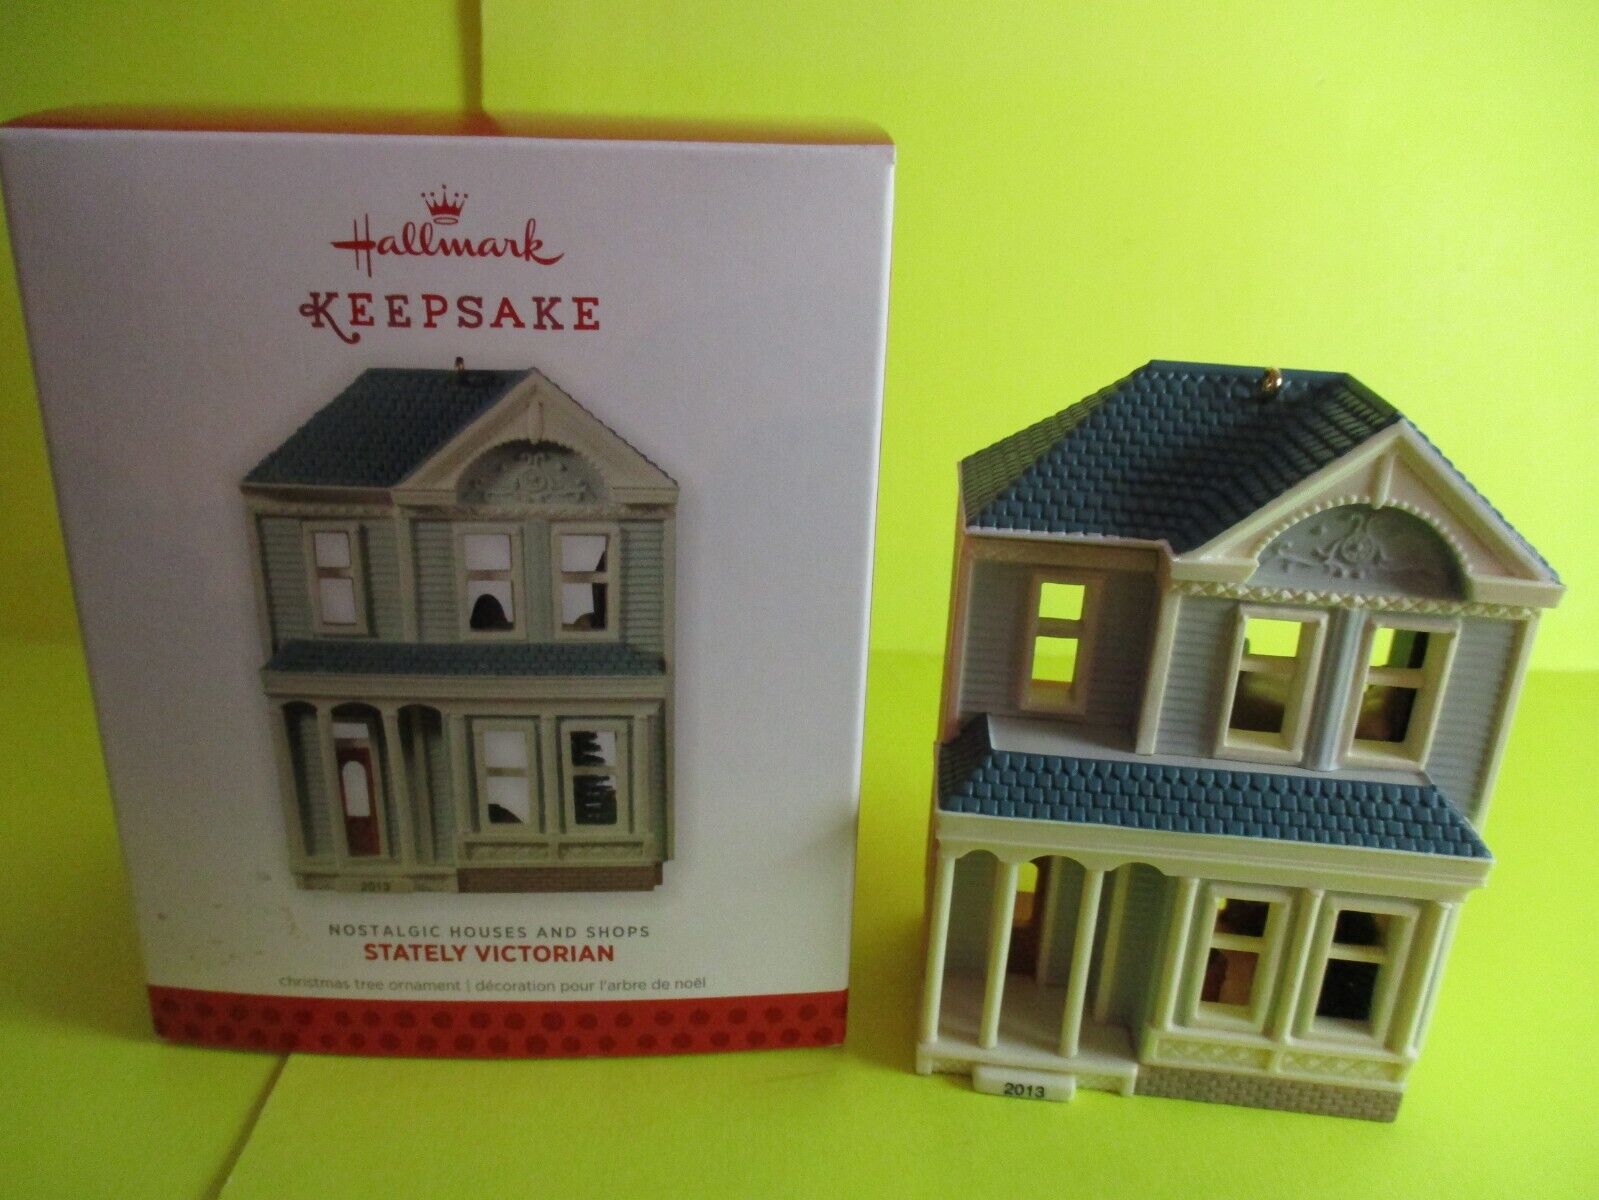 2013 Hallmark Stately Victorian 30th Nostalgic Houses and Shops New but SDB